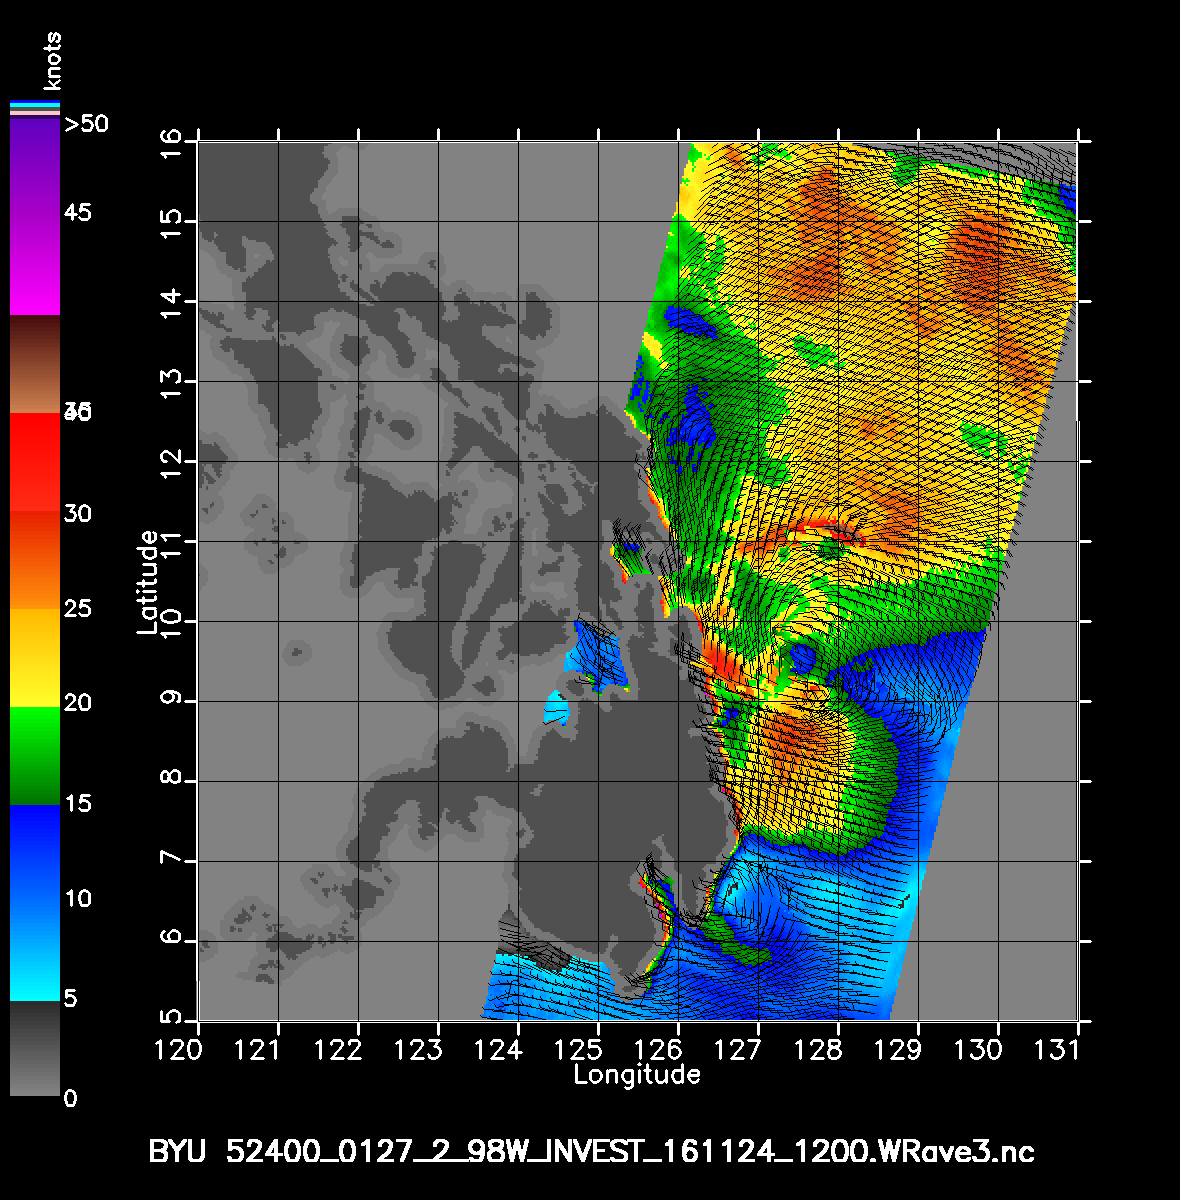 20161124.120000.ASCAT.mta.r52400.wrave3.98W.INVEST.gif